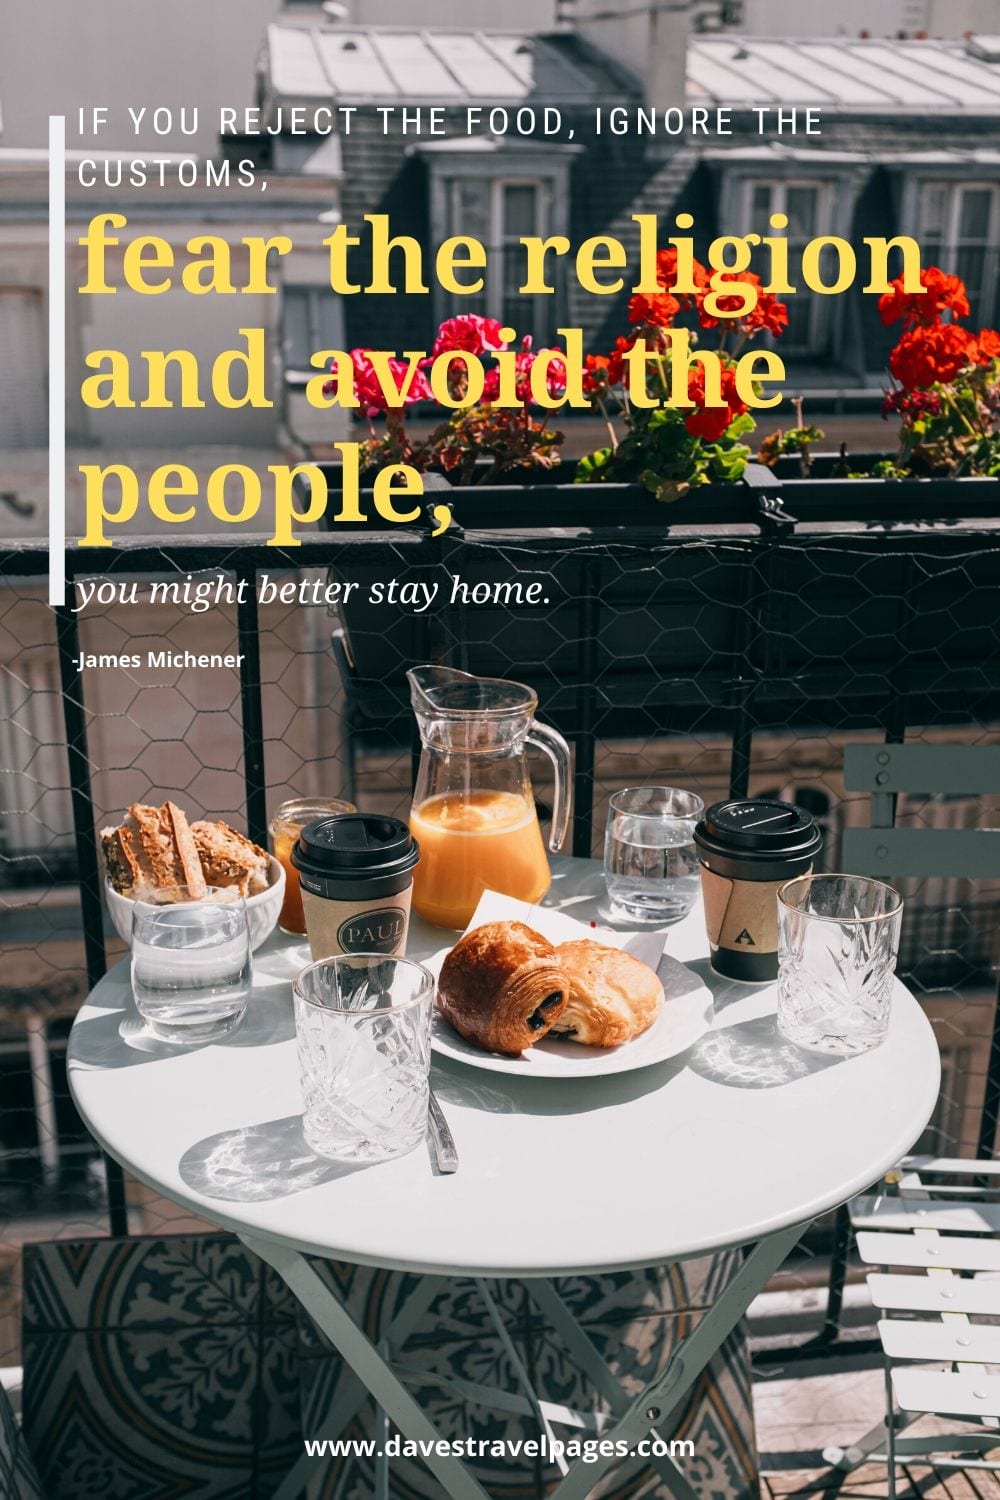 Famous travel writing: If you reject the food, ignore the customs, fear the religion and avoid the people, you might better stay home.” -James Michener